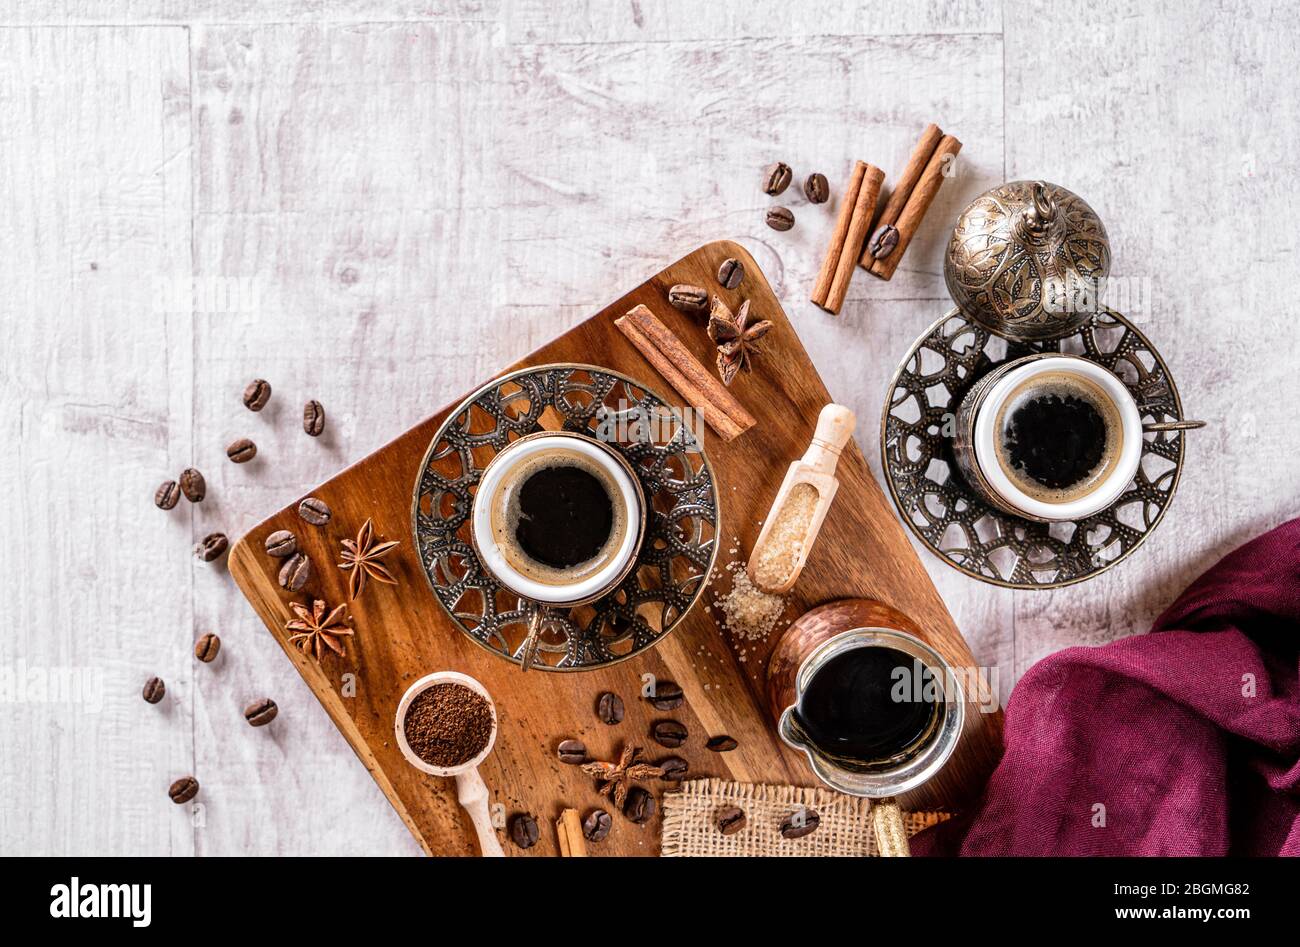 Cup of aromatic coffee drink and coffee beans on wooden background. Top view Stock Photo